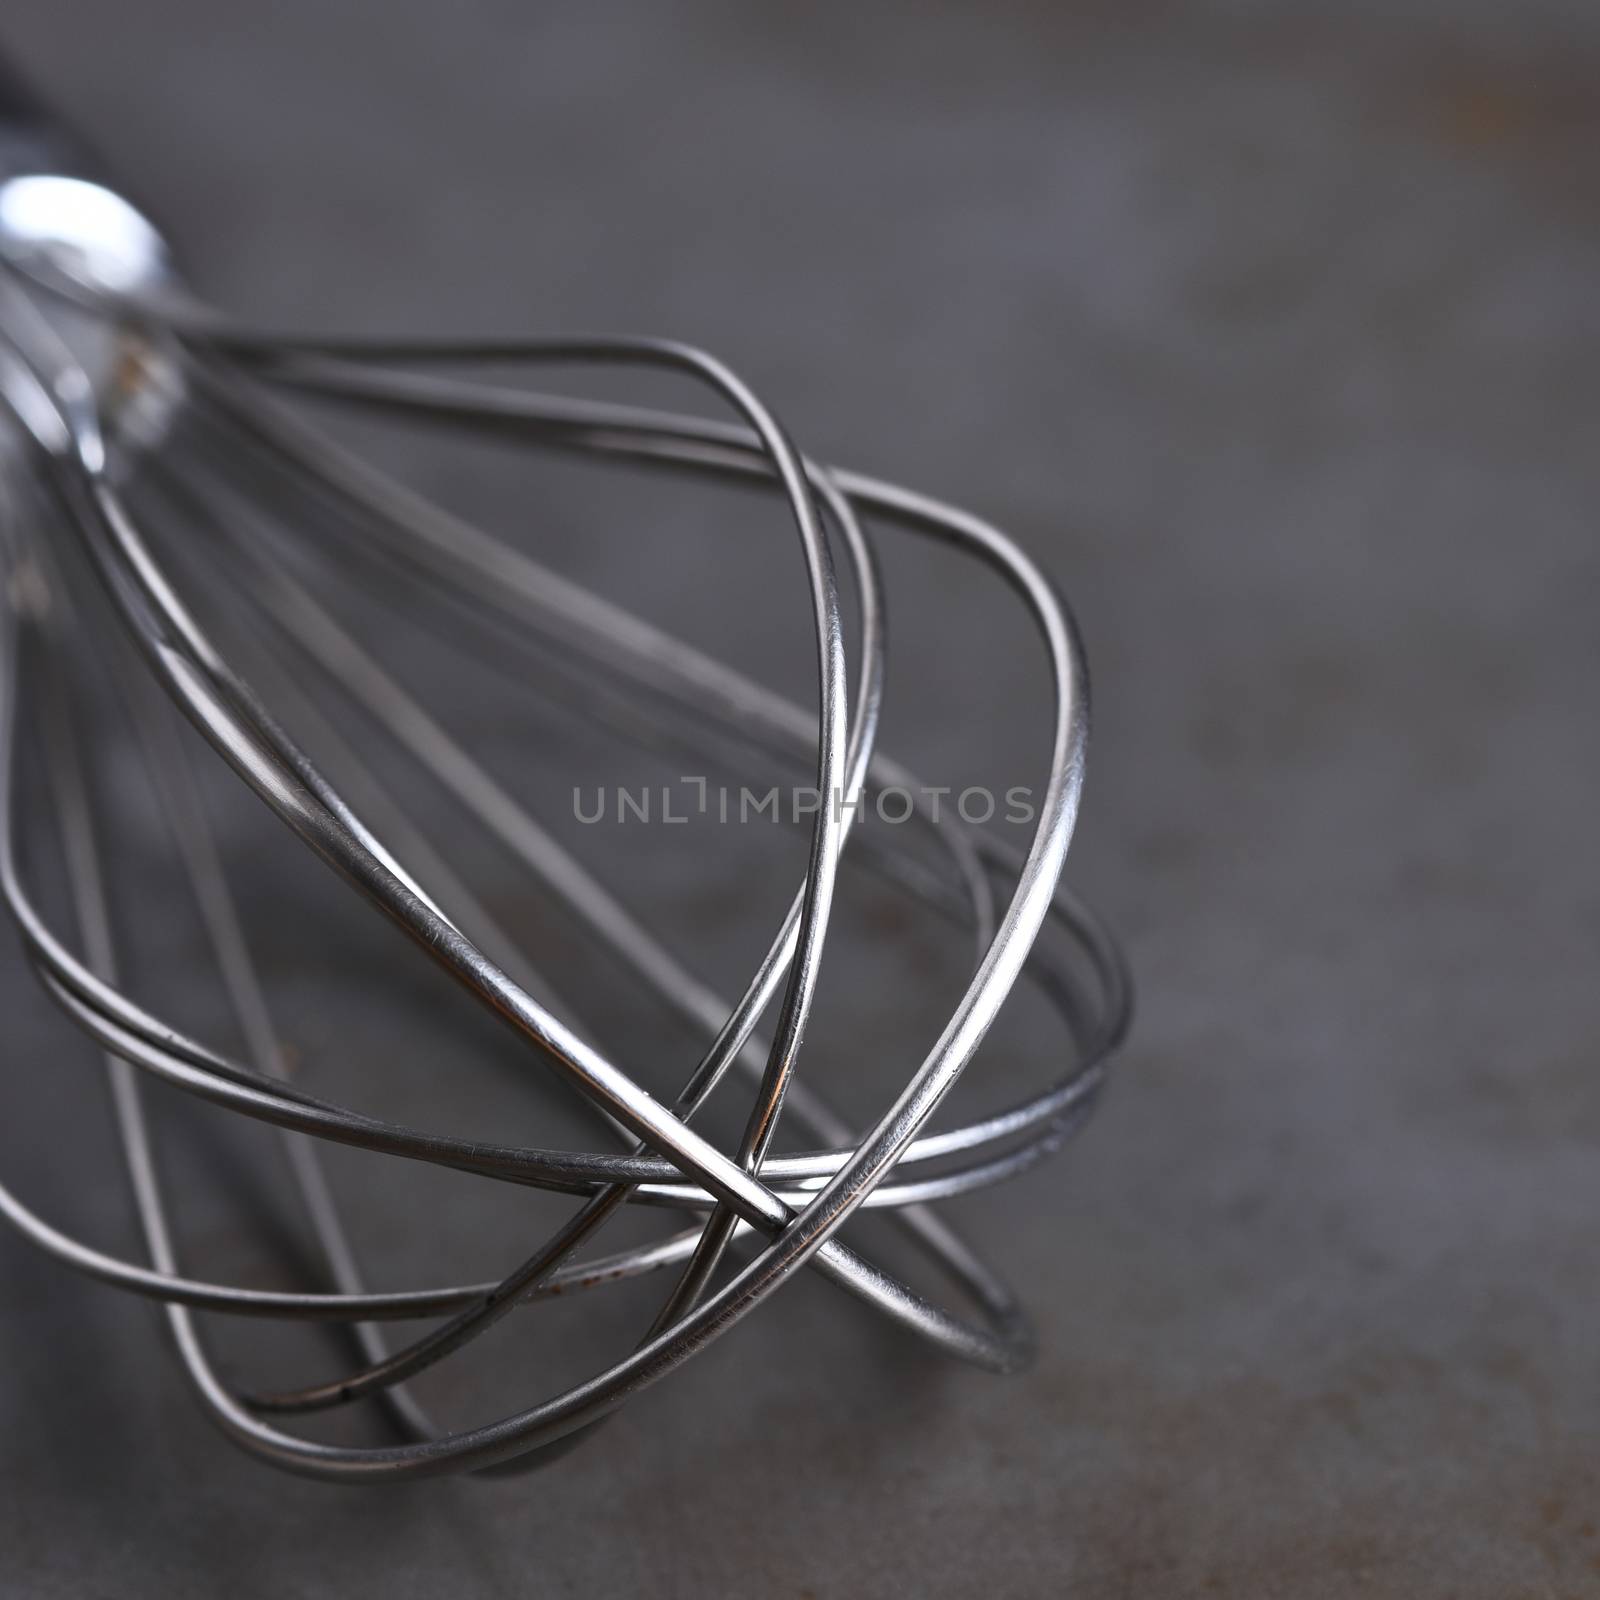 Whisk Closeup by sCukrov